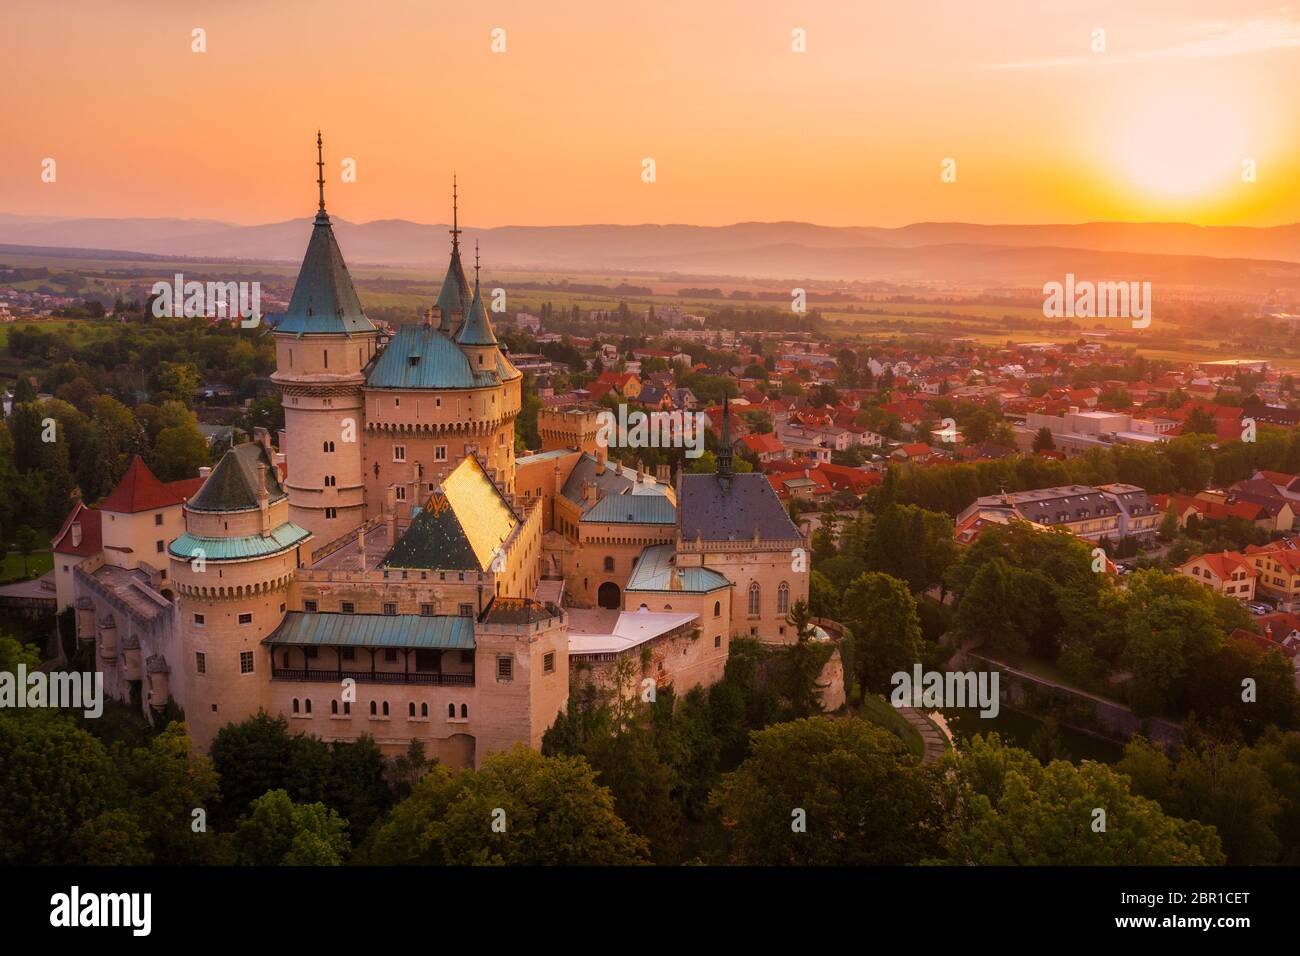 Aerial view of Bojnice medieval castle, UNESCO heritage in Slovakia. Romantic castle with gothic and Renaissance elements built in 12th century. Stock Photo